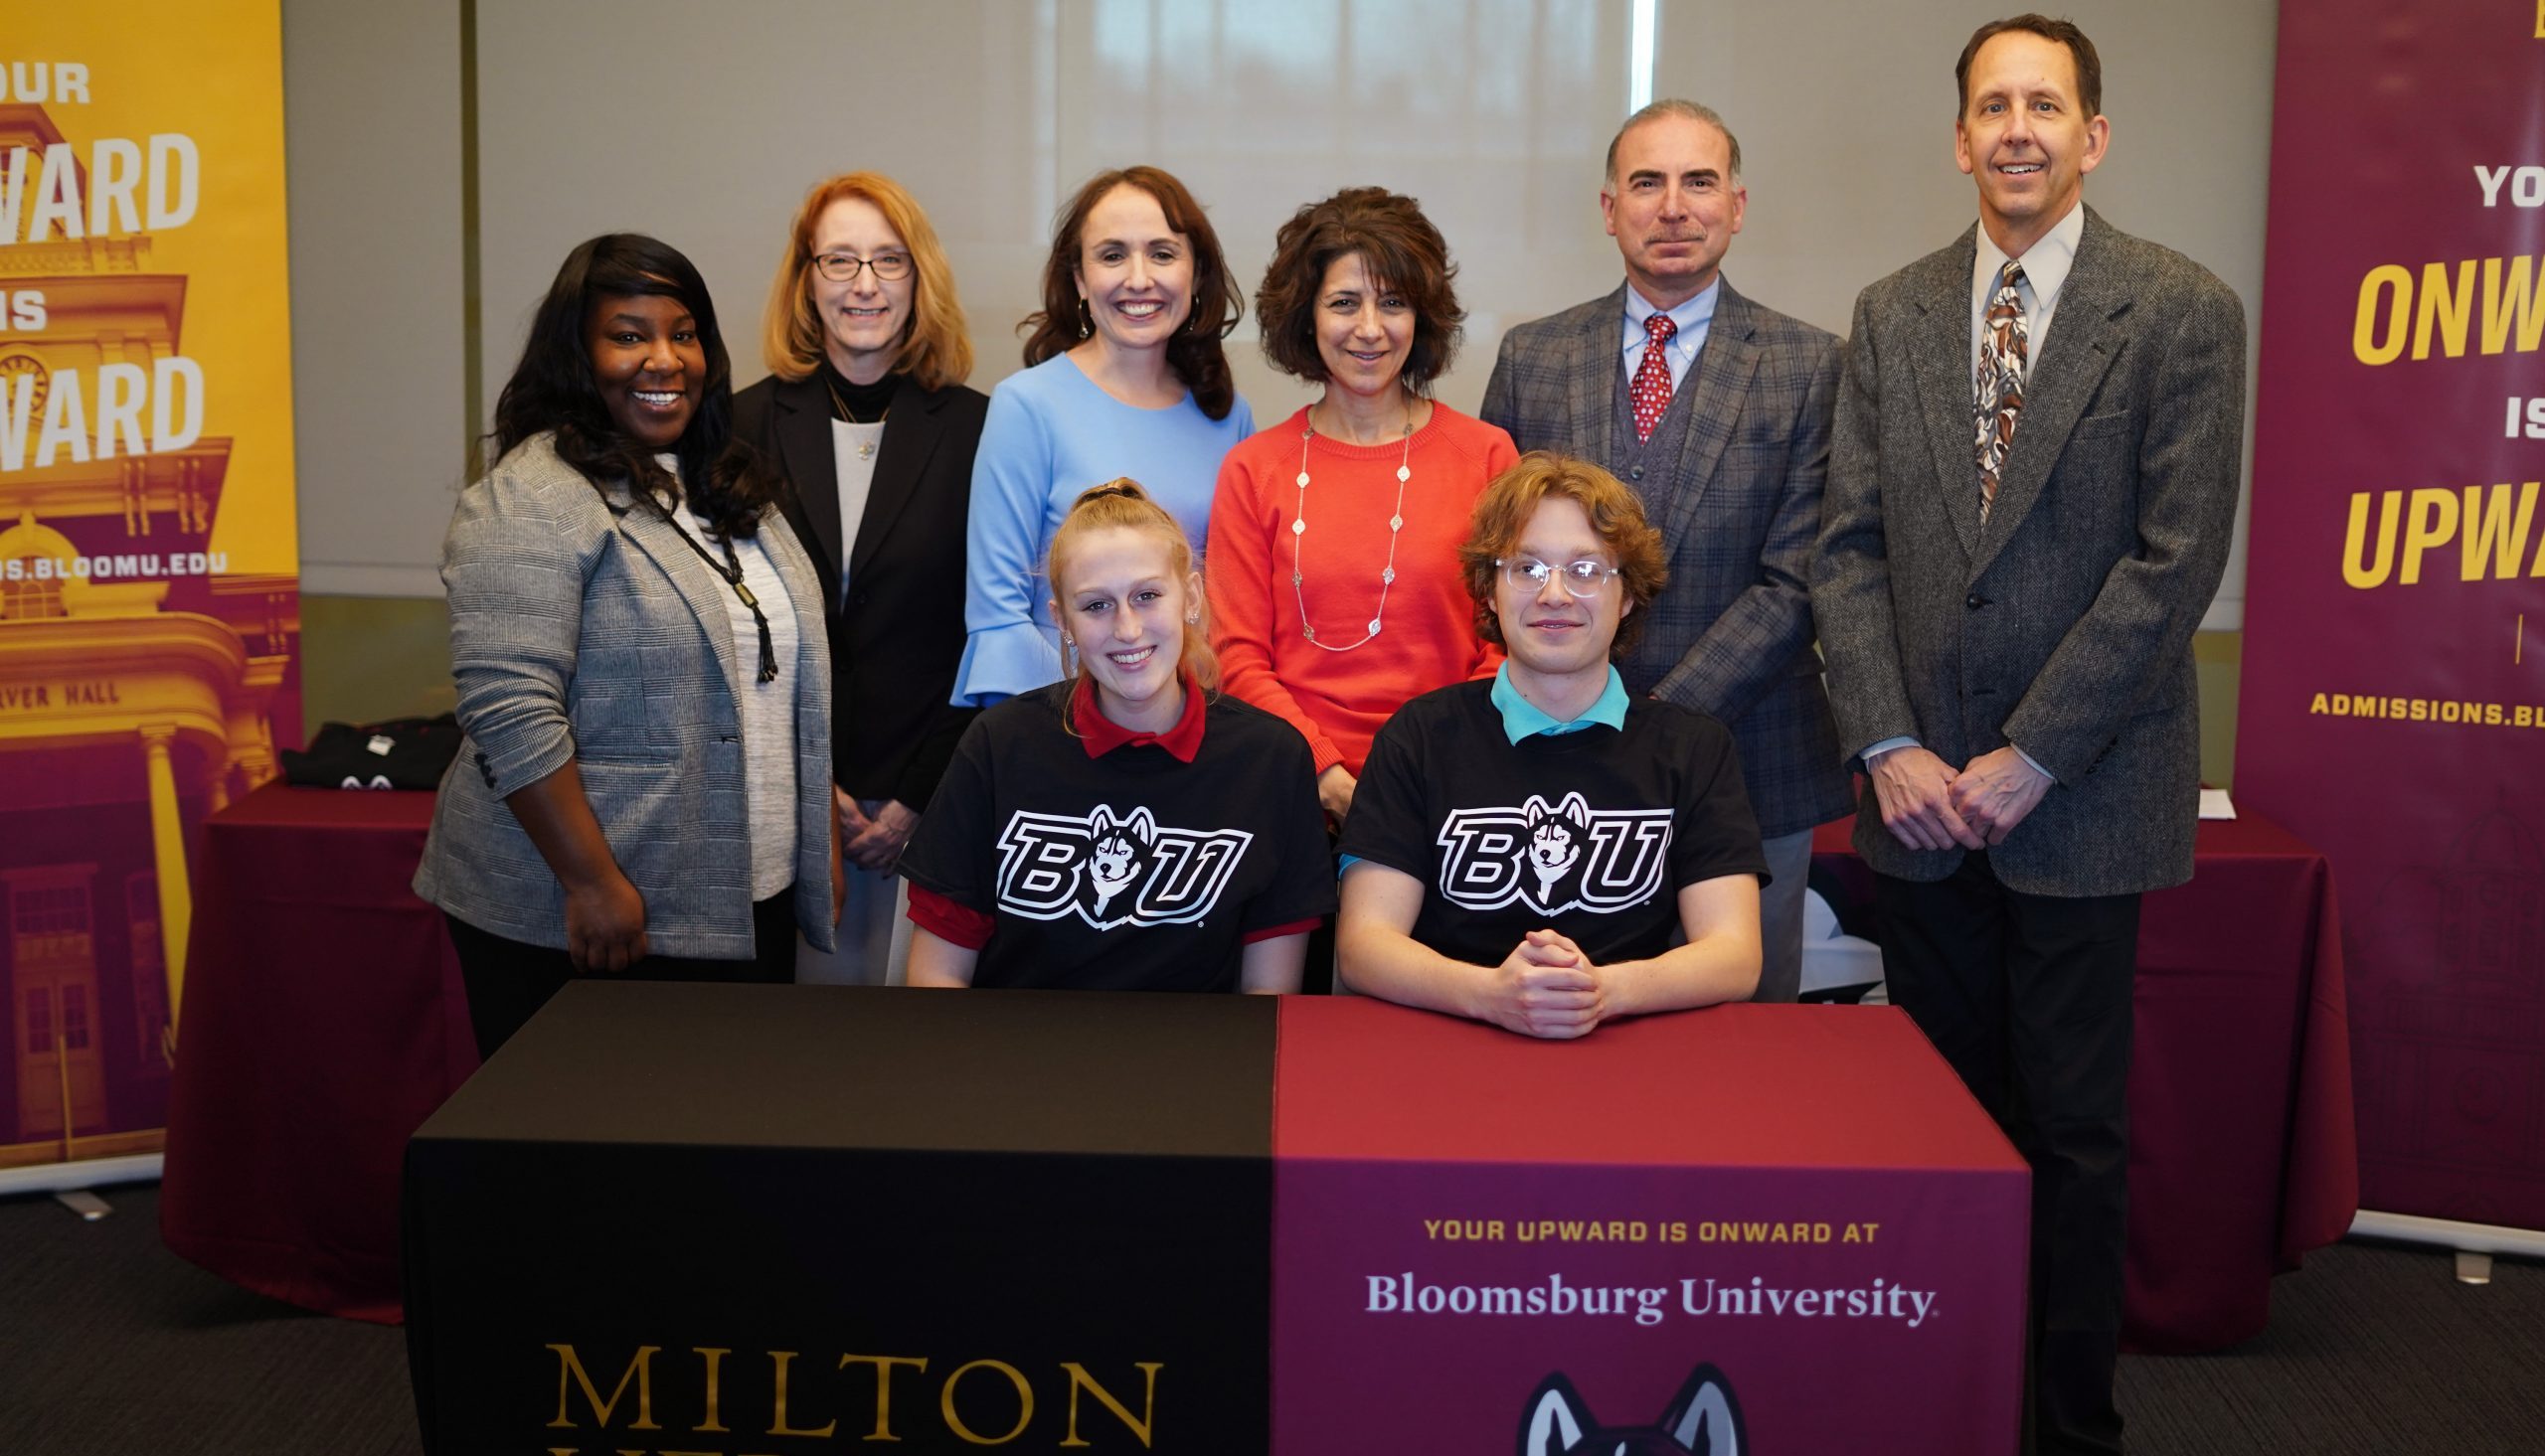 A group of Milton Hershey School students and staff pose for a photo with representatives from Bloomsburg University.